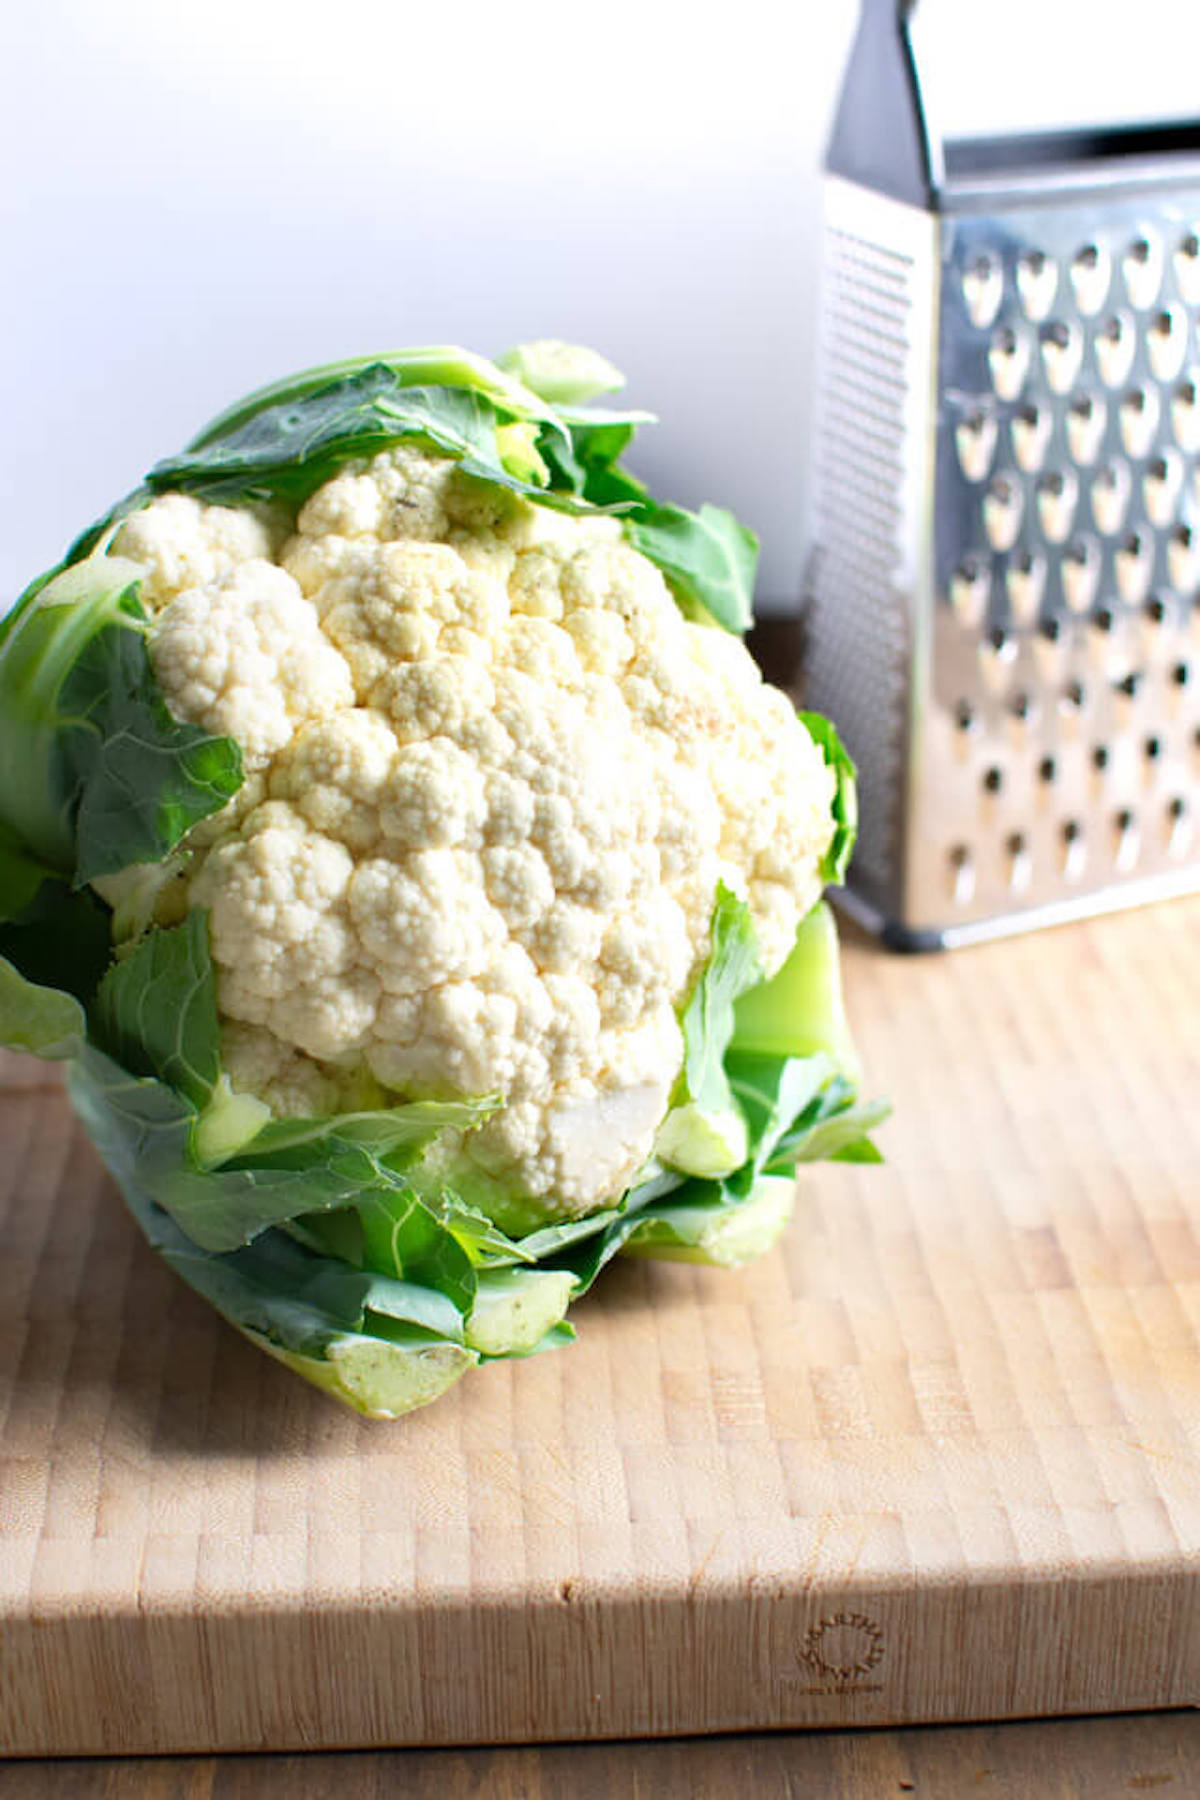 Head of cauliflower on wooden cutting board with box grater behind it